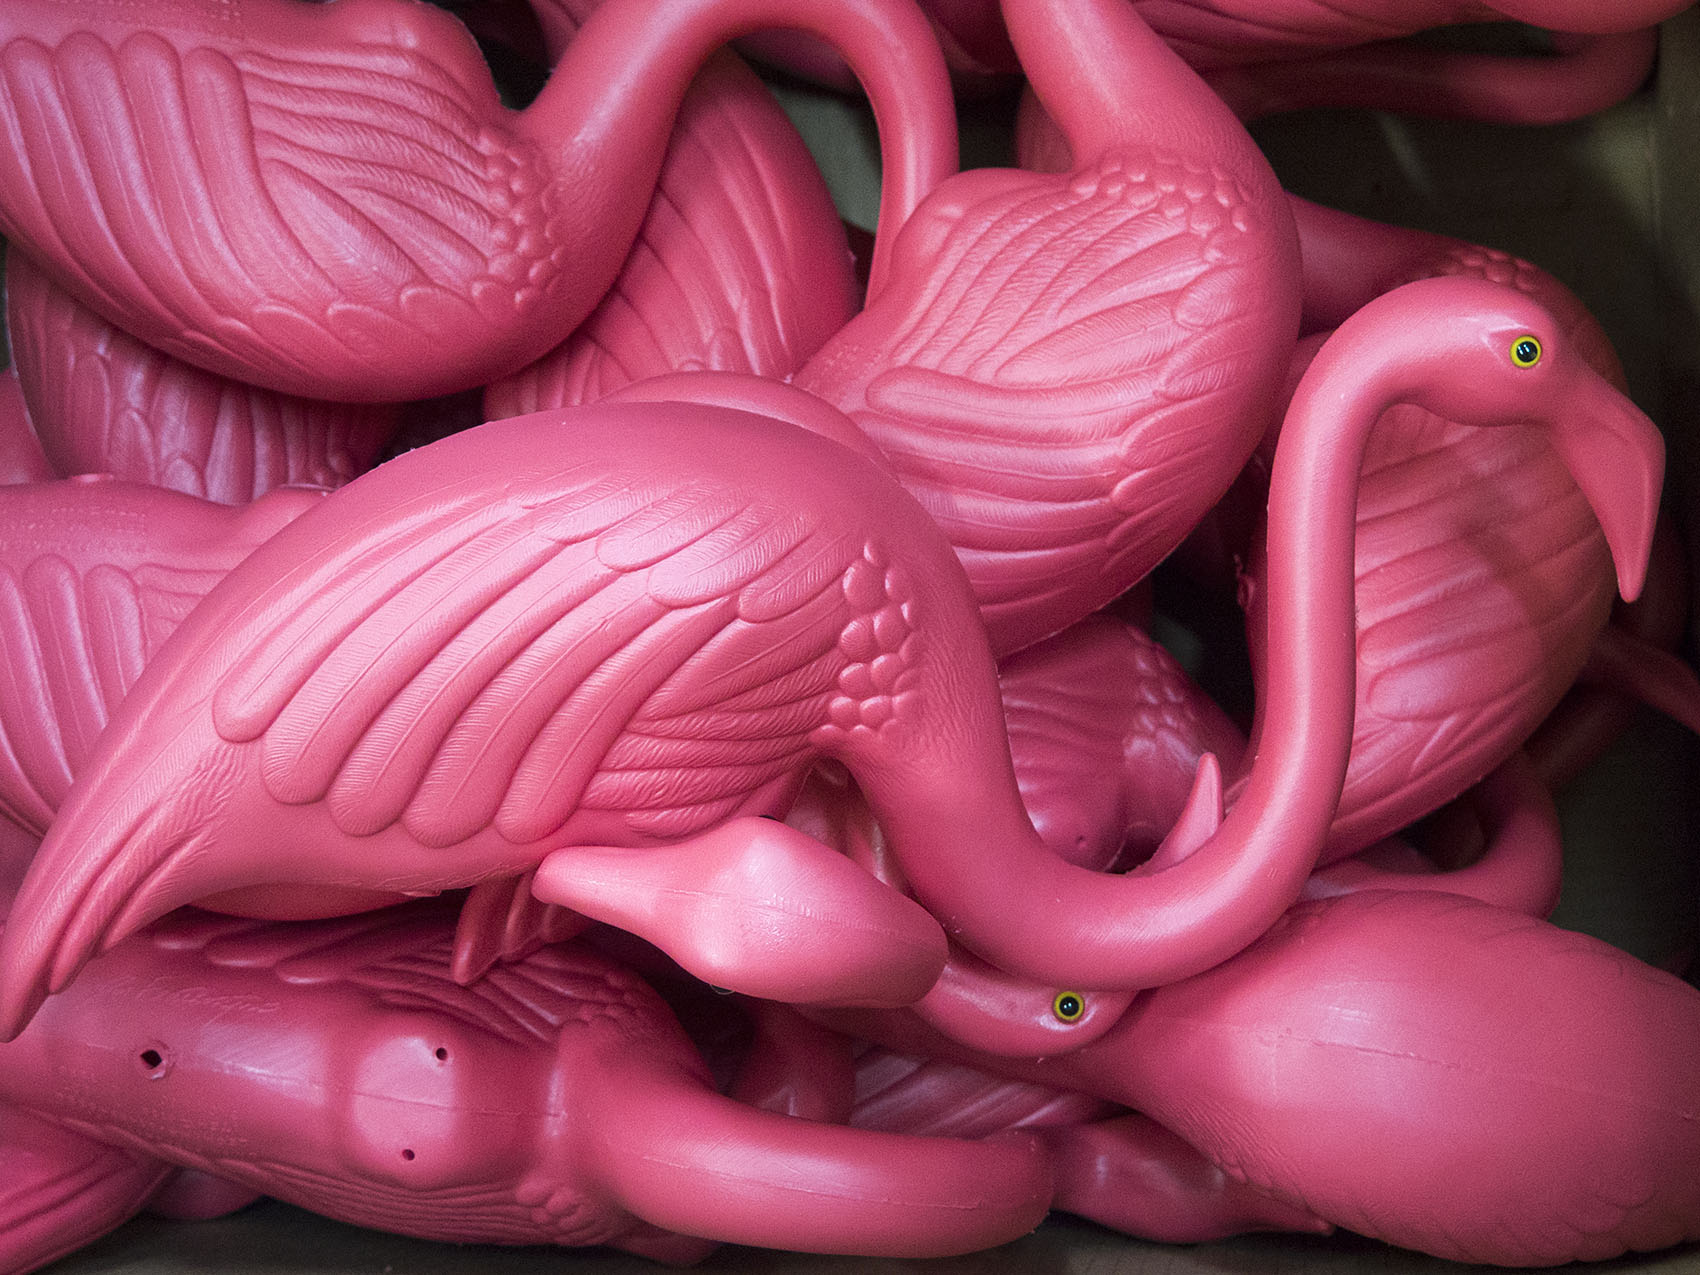 Fitchburg's Don Featherstone created the original plastic pink flamingo back in 1957. (Andrea Shea/WBUR)